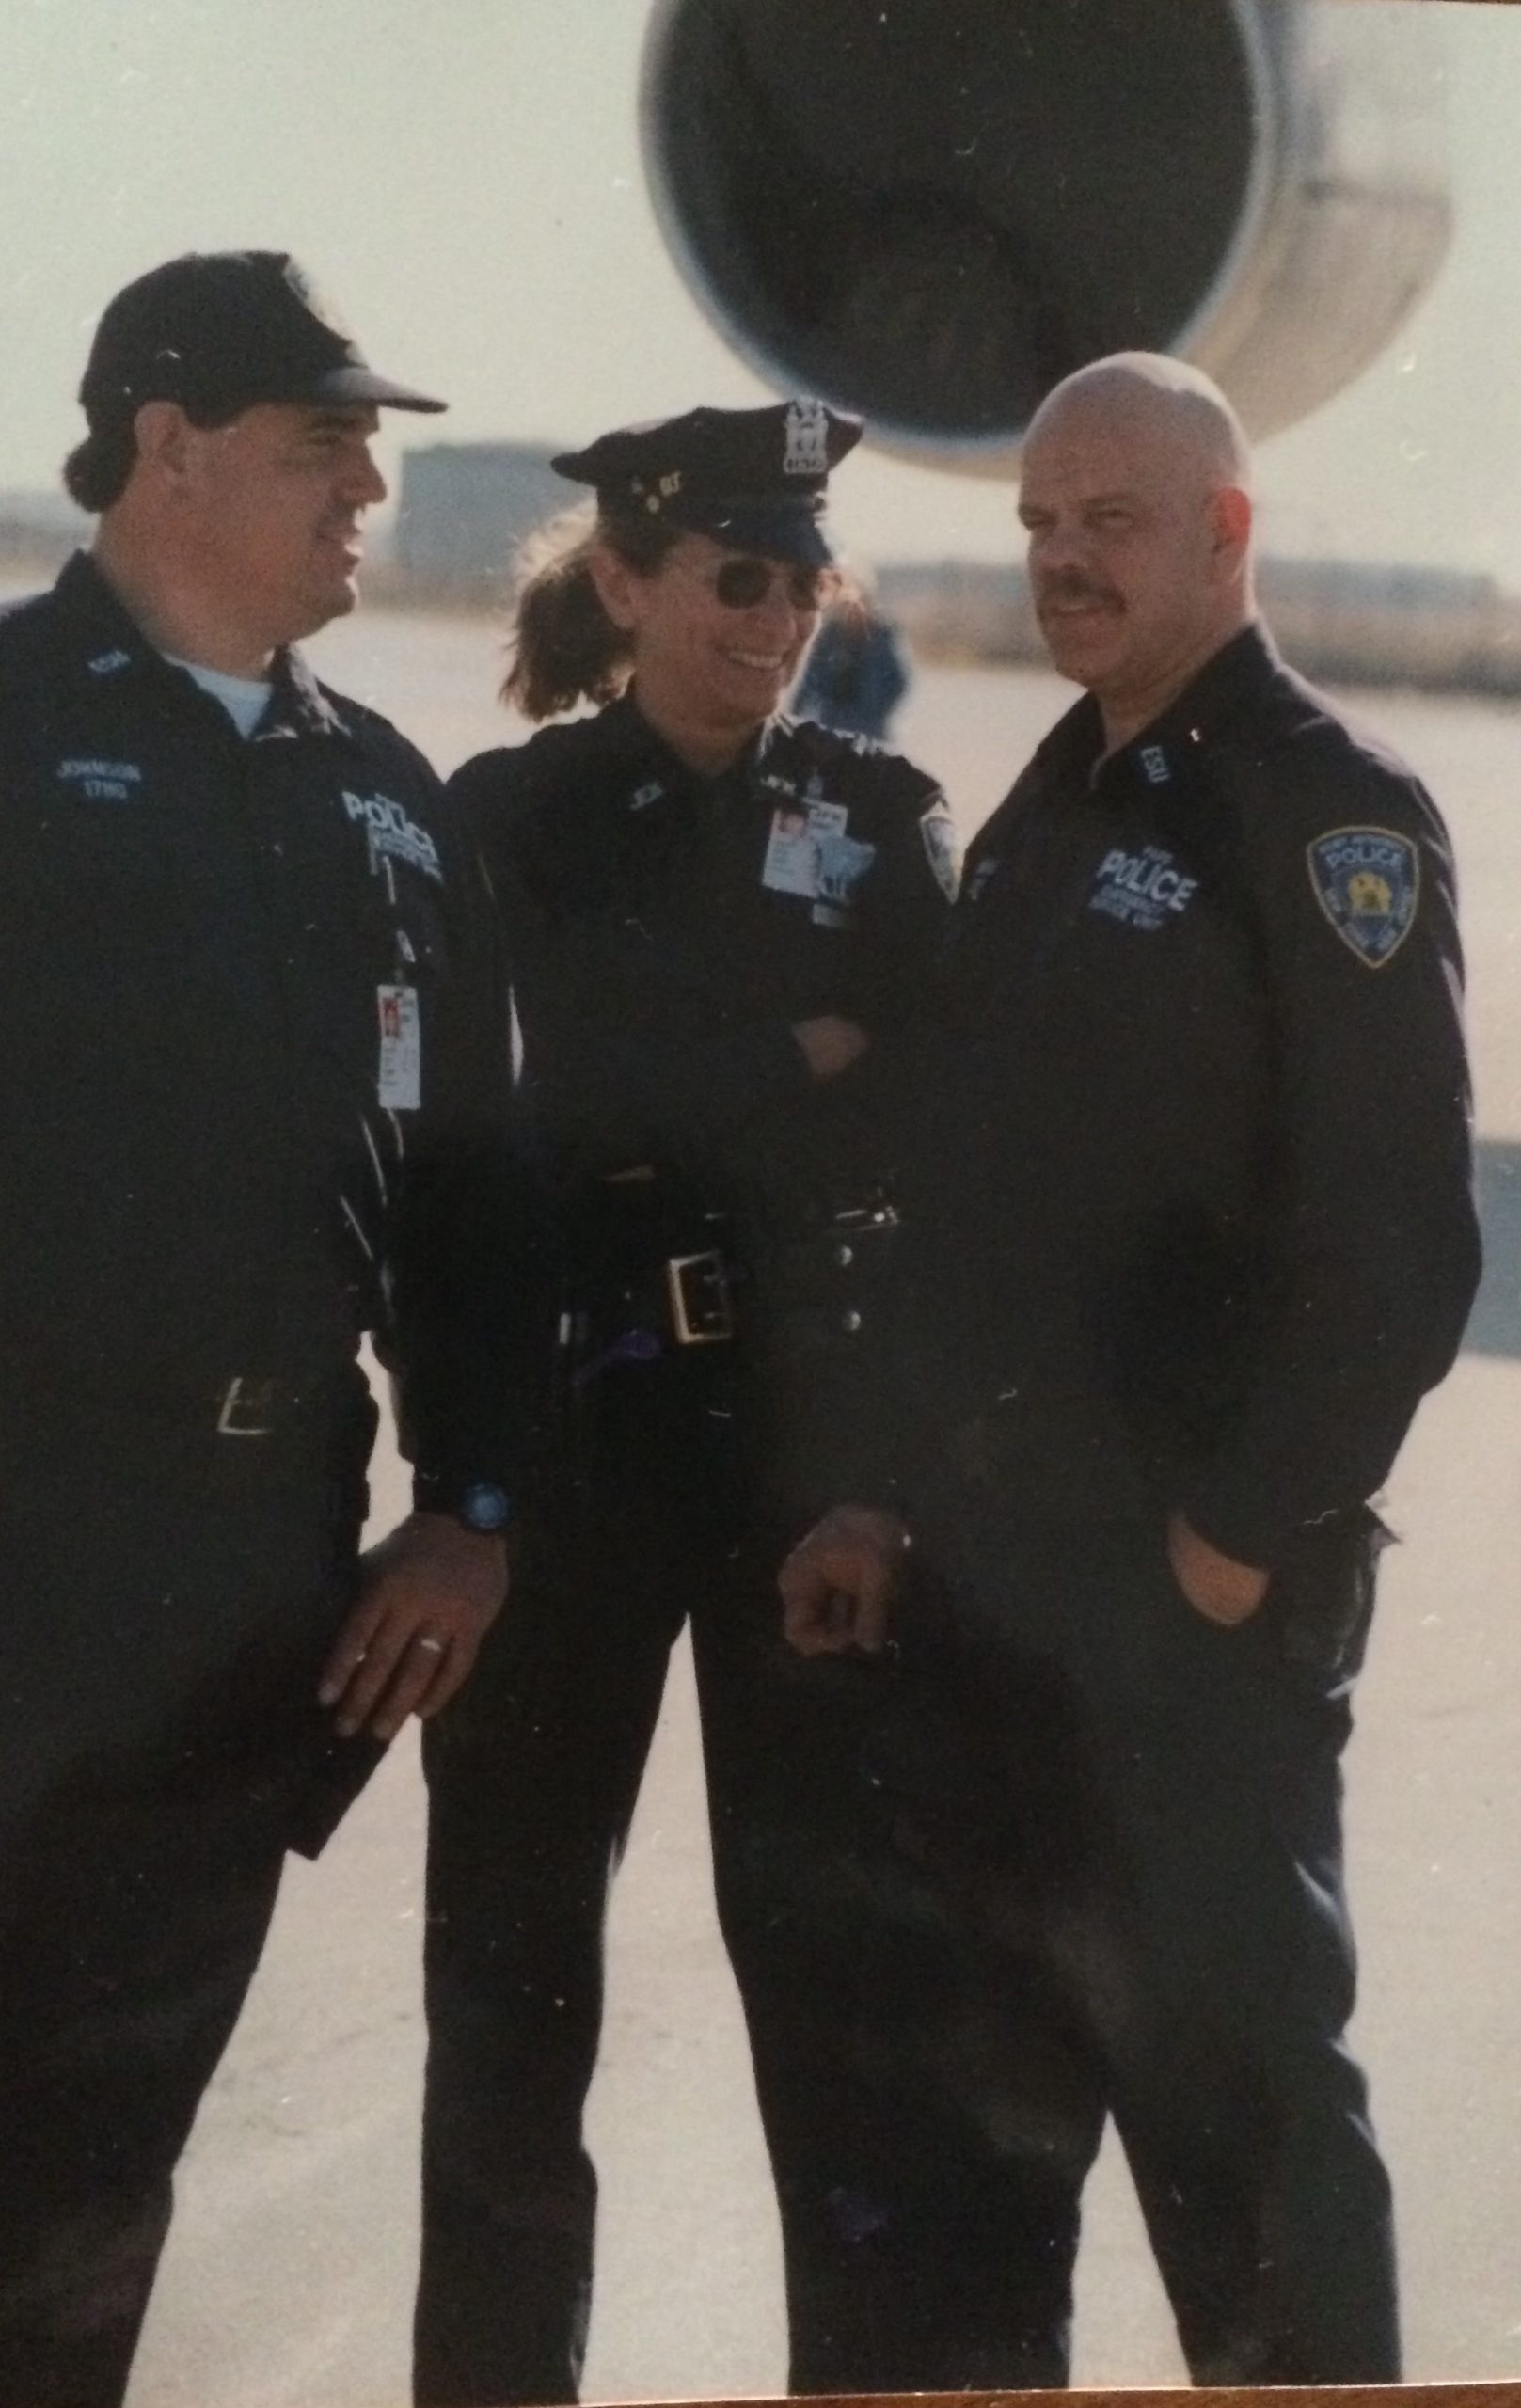 Port Authority Police Officers Pete Johnson, Doris Caridi and George Howard prior to September 11, 2001. Mr. Howard was killed by raining debris during the aftermath of the terrorist attack, after rushing to the scene on his day off to help.